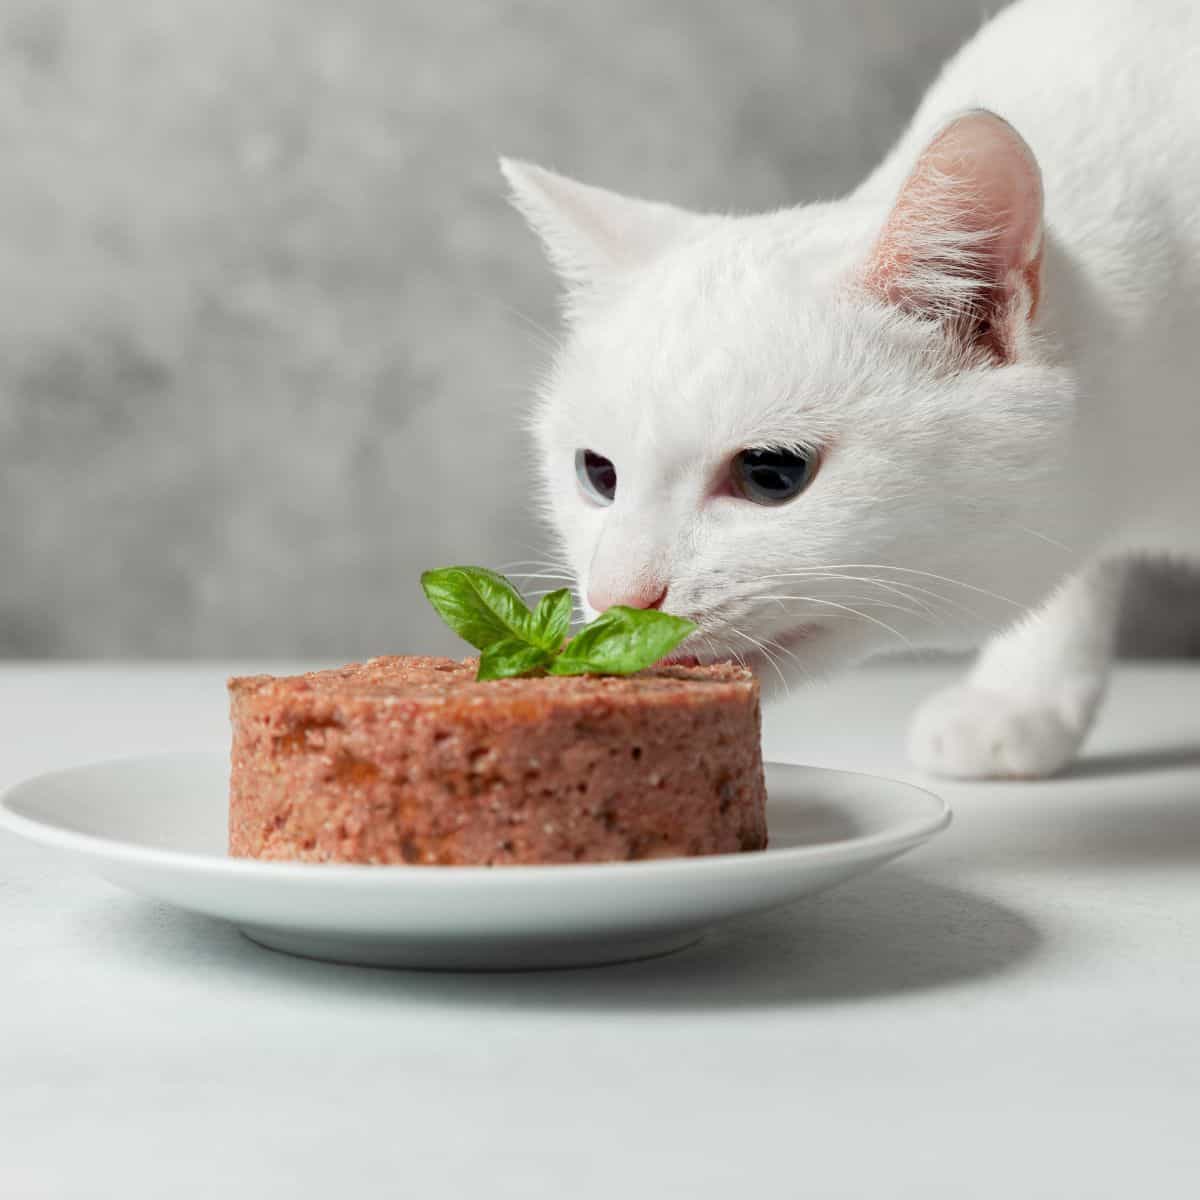 white cat eating food of a plate